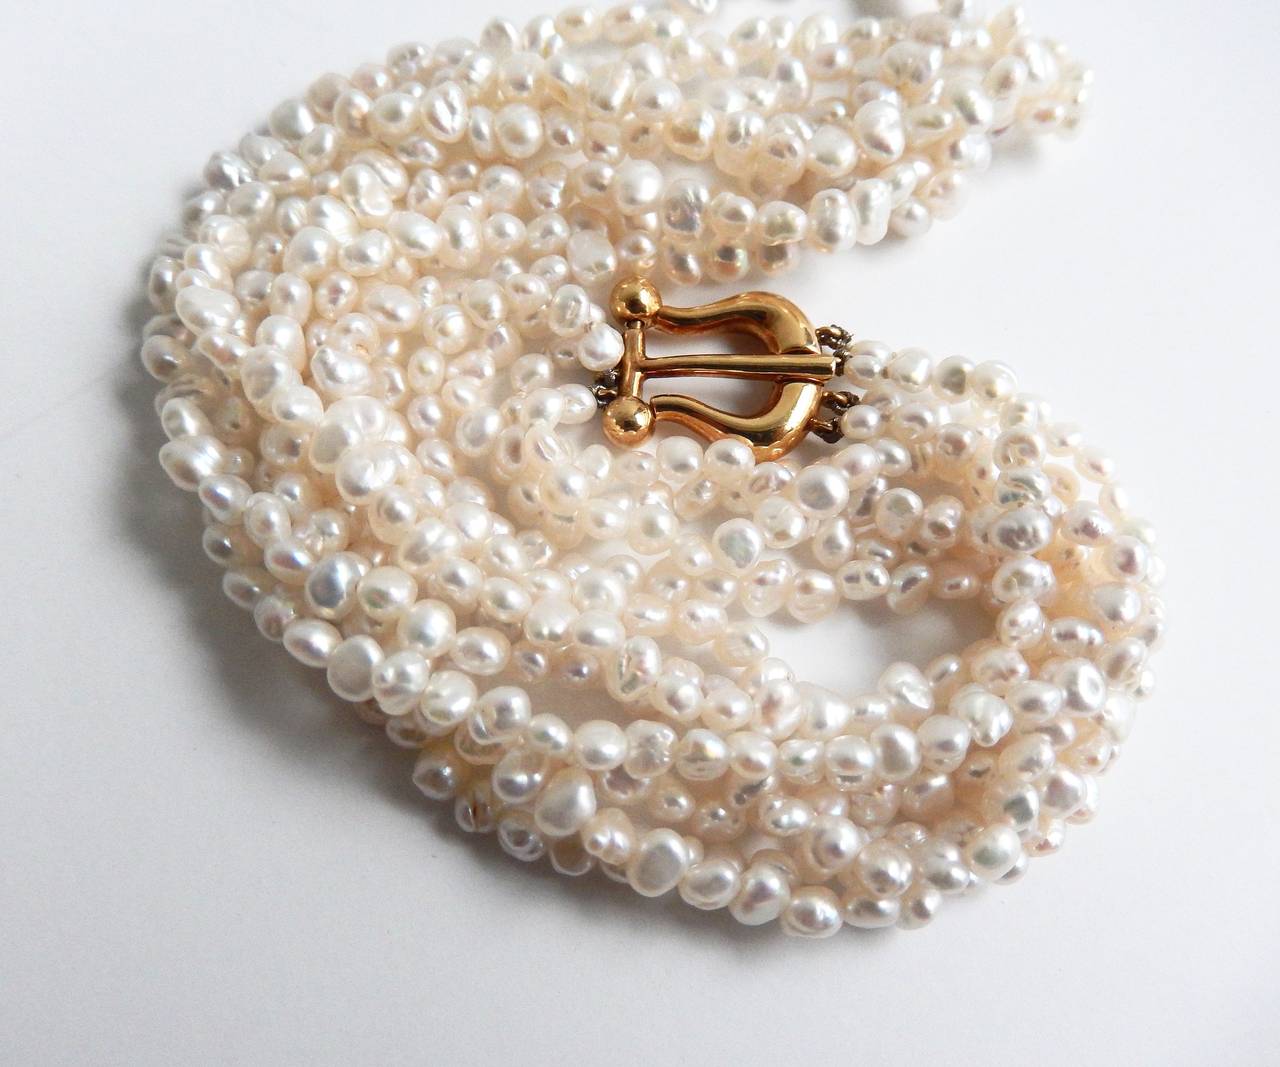 A four-strand freshwater pearl necklace with an 18K gold lyre-shaped clasp
designed in 1981 by Paloma Picasso for Tiffany & Co.  A beautiful vintage necklace by Paloma Picasso created soon after she began working with Tiffany & Co in 1980. Signed